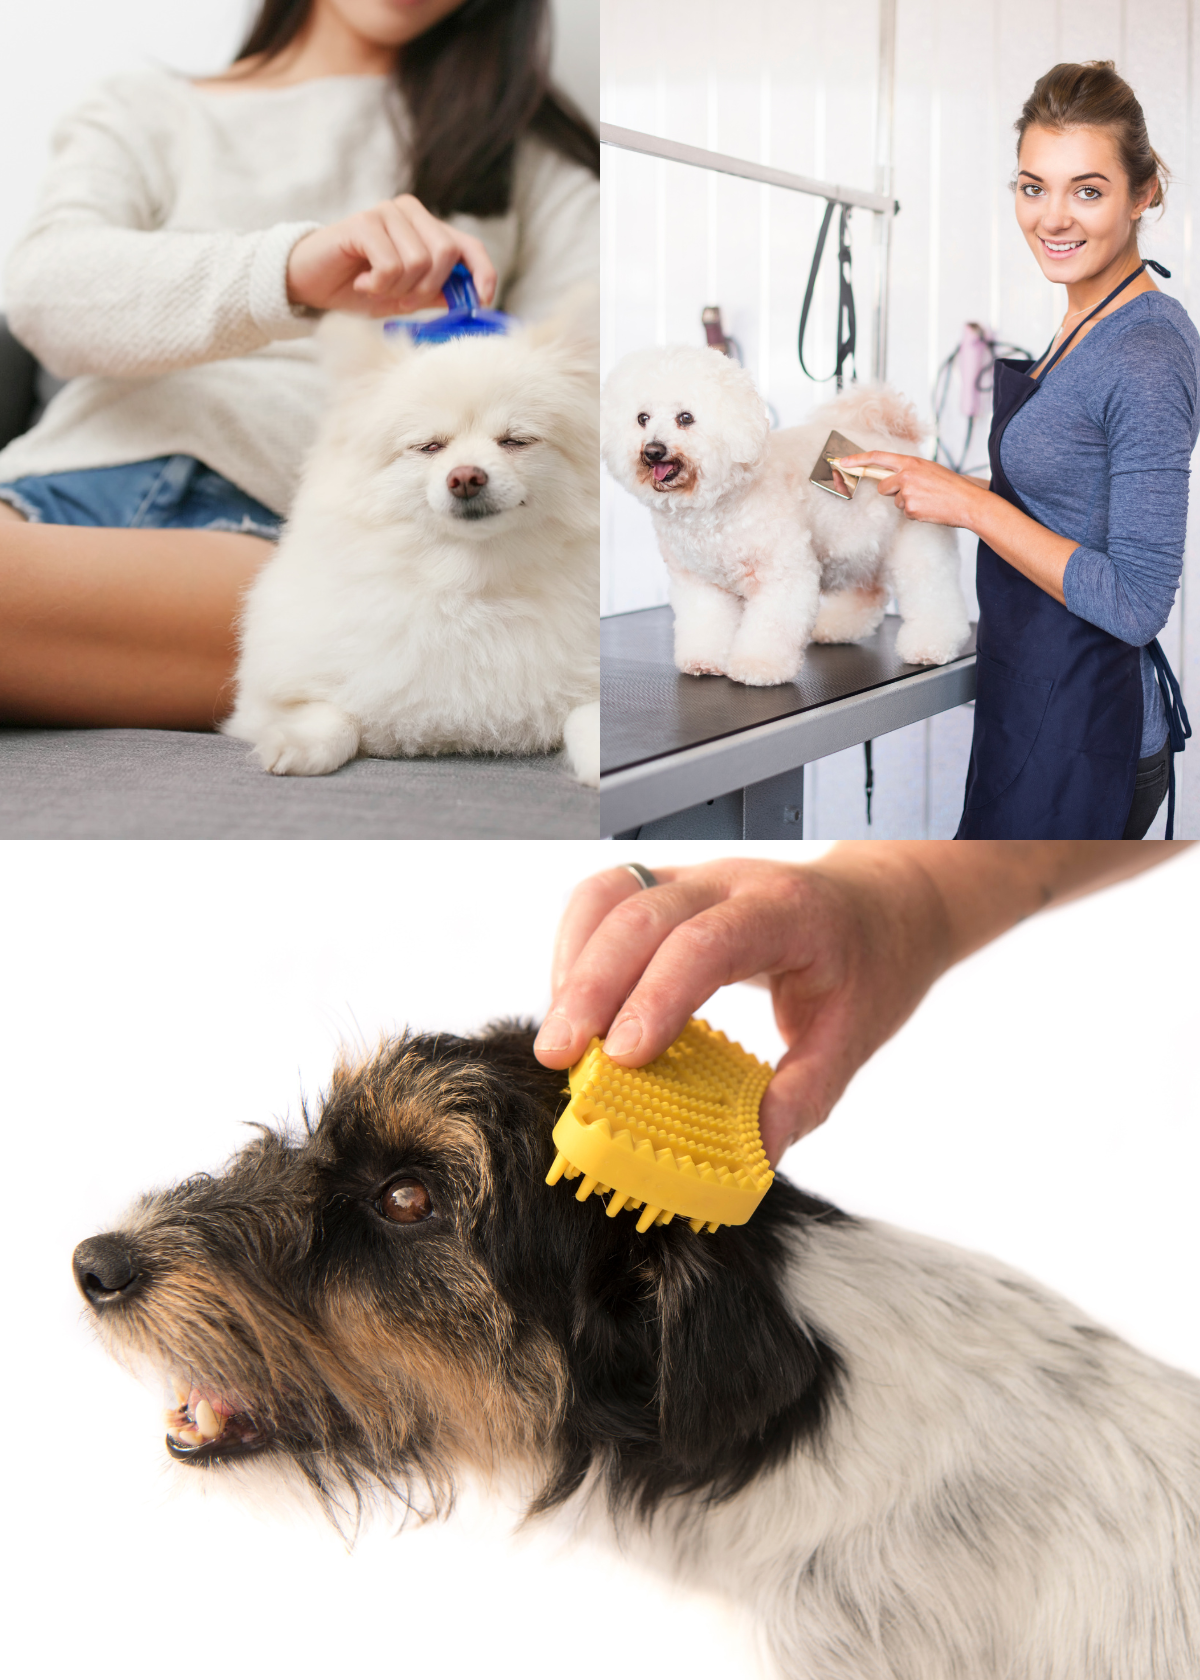 The Best Dog Brushes for Every Budget and Every Type of Dog